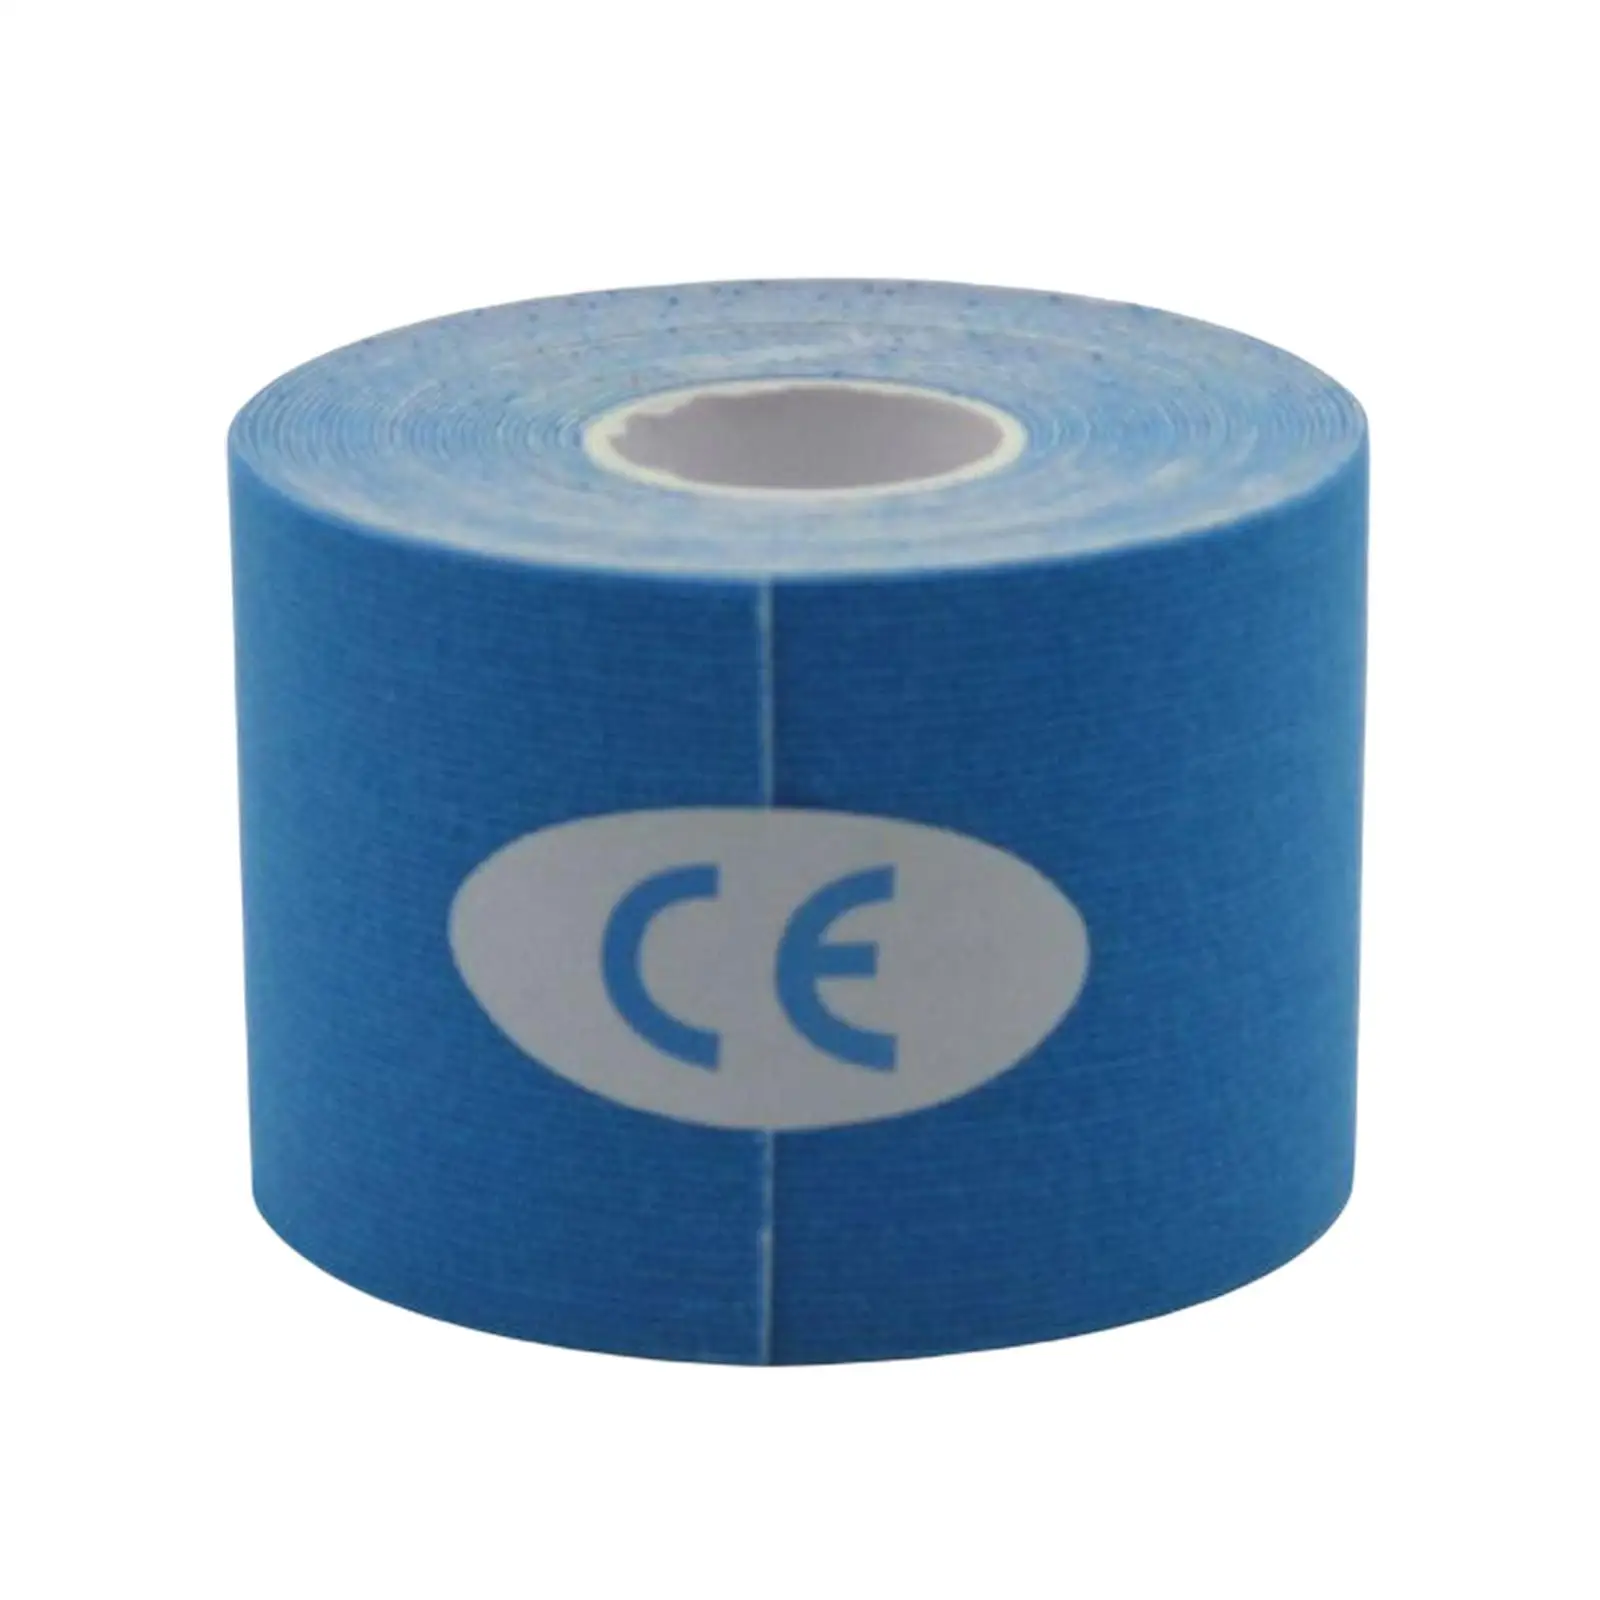 5M Roll Tape for Sports Muscle Tape Water Resistant Elastic Breathable Athletic